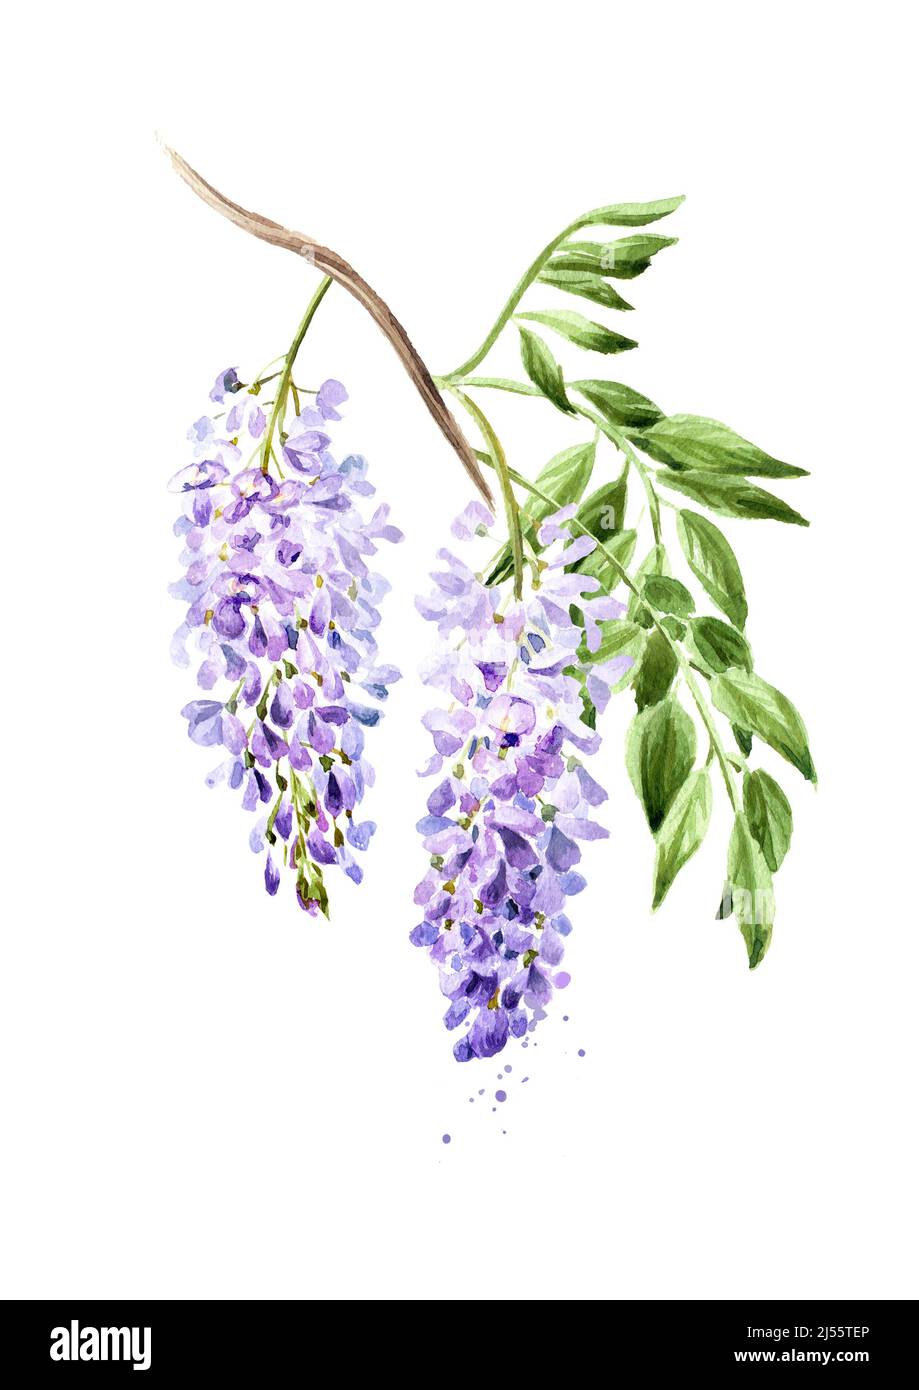 Purple pink blue wisteria flower  blossom branch. Hand drawn watercolor illustration, isolated on white background Stock Photo